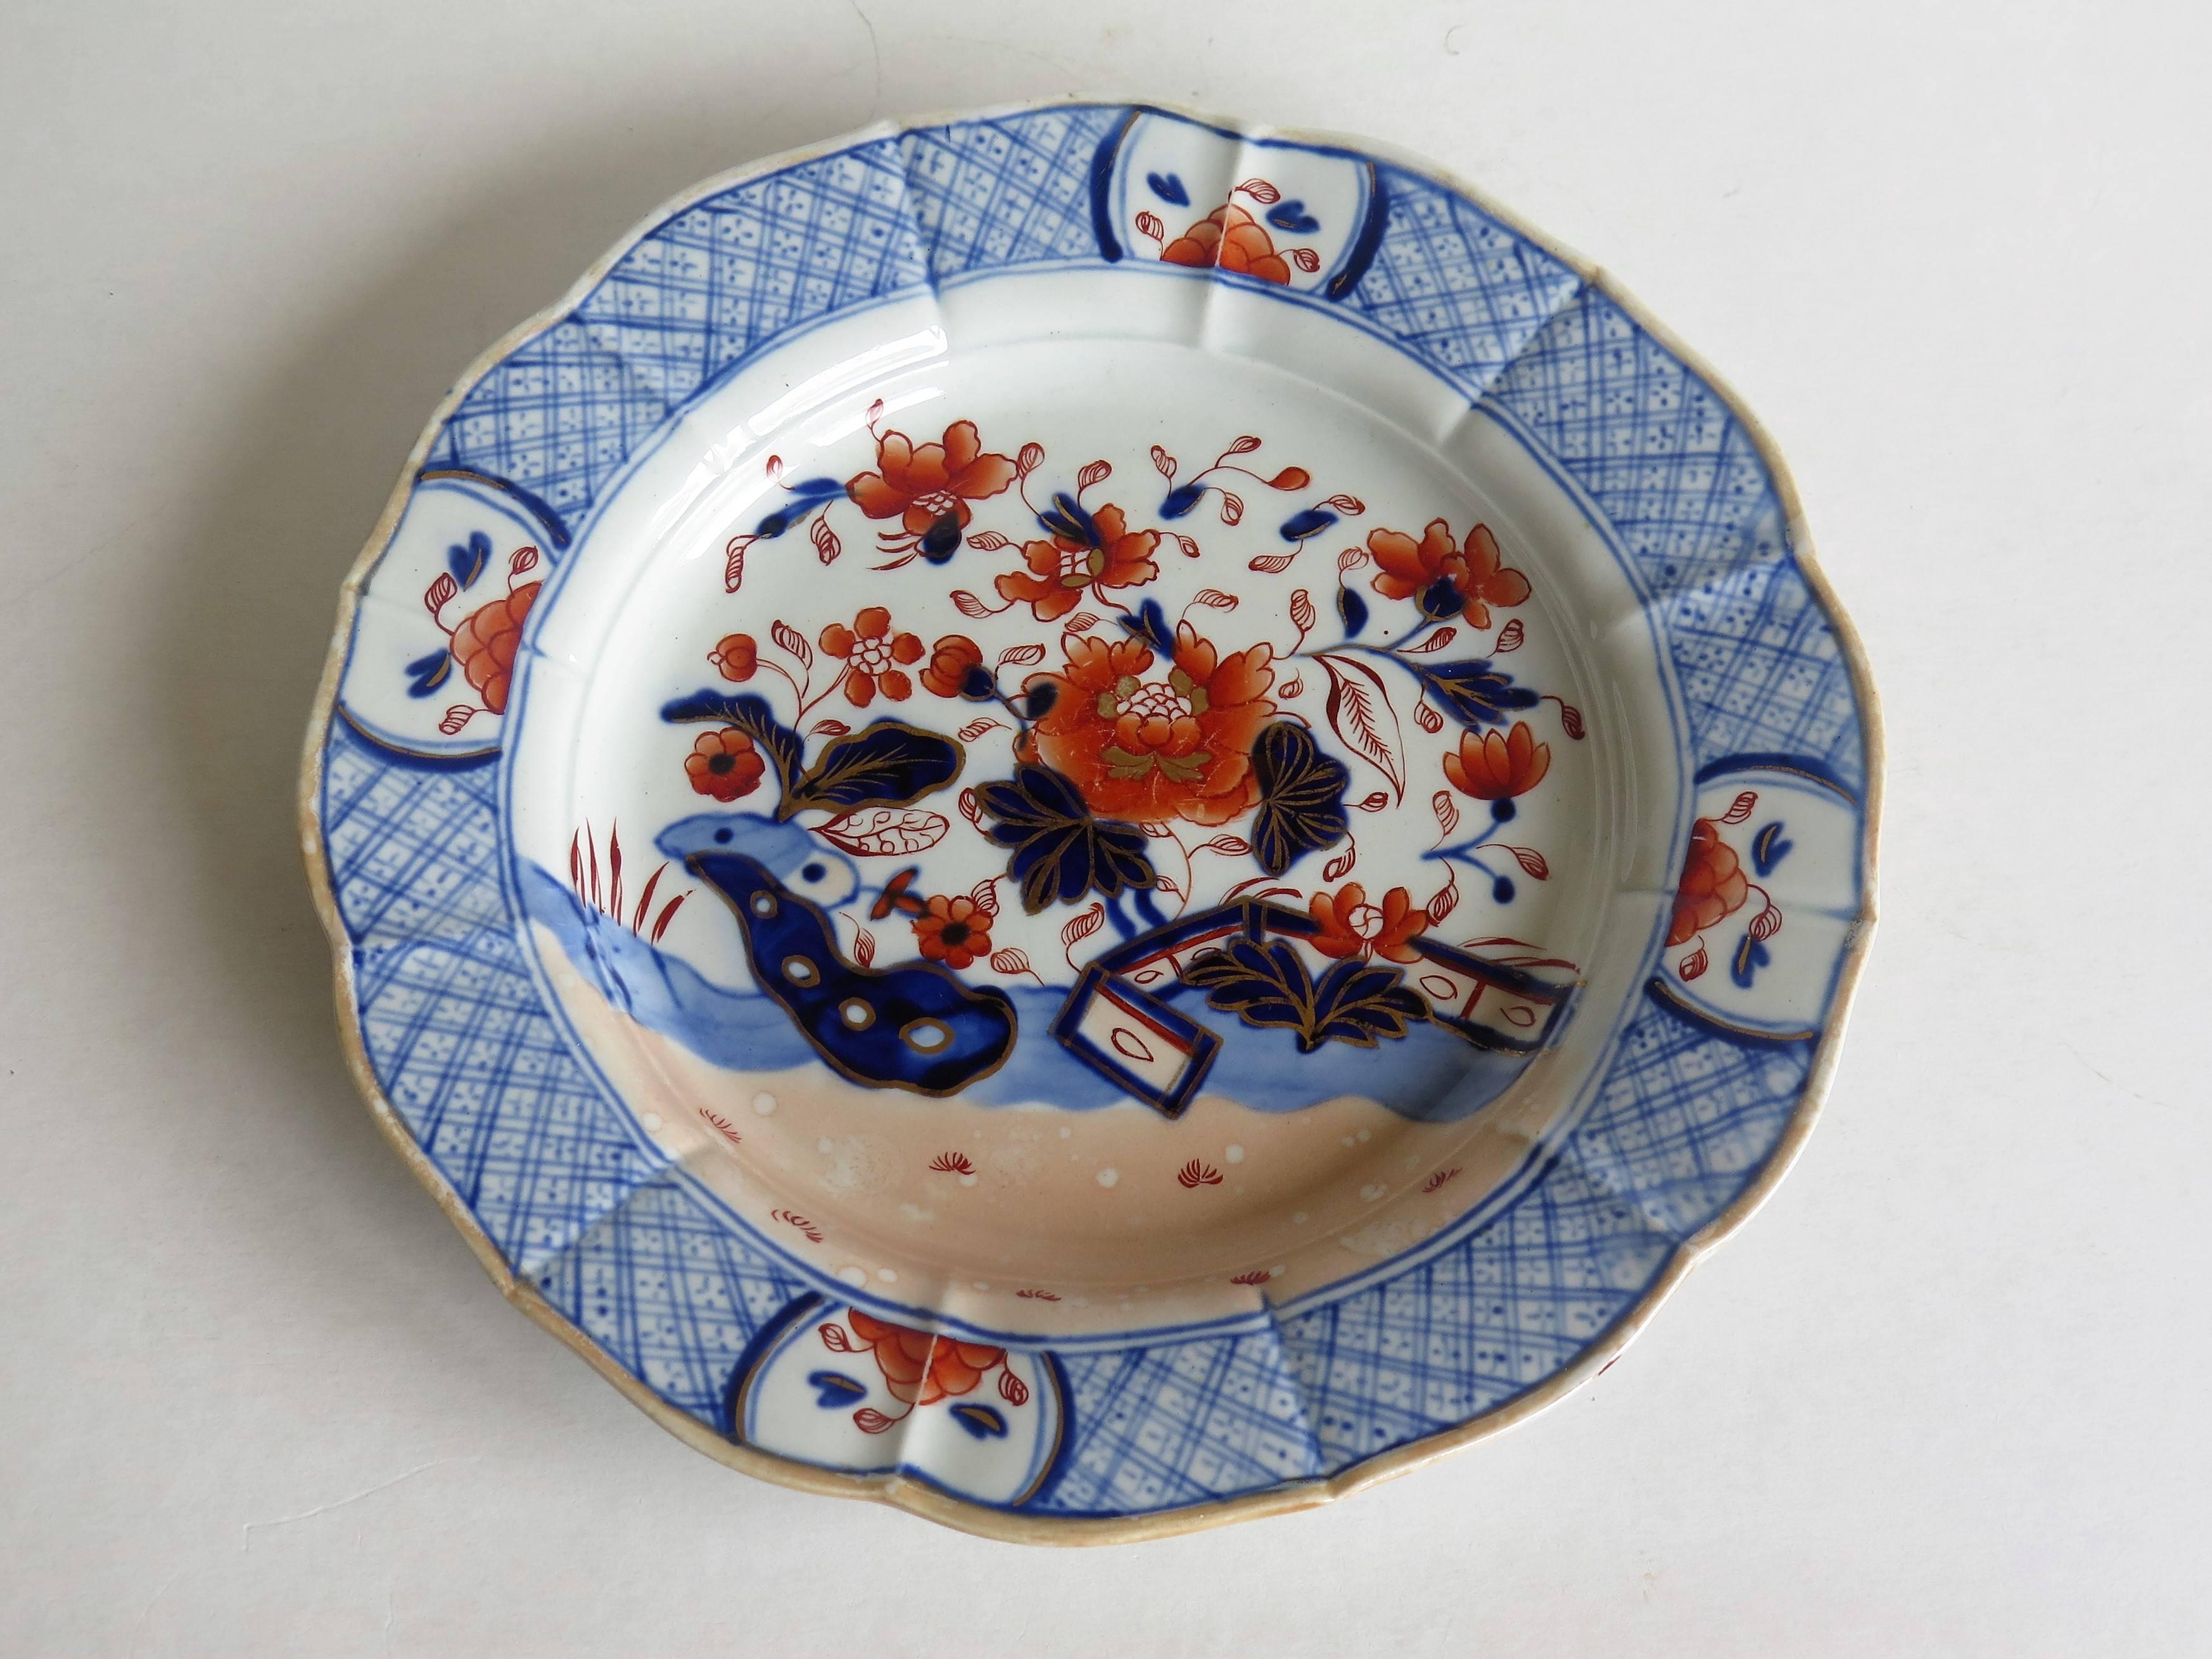 Hand-Painted Early Mason's Ironstone Desert Plate or Dish in Fence Japan Pattern, circa 1815